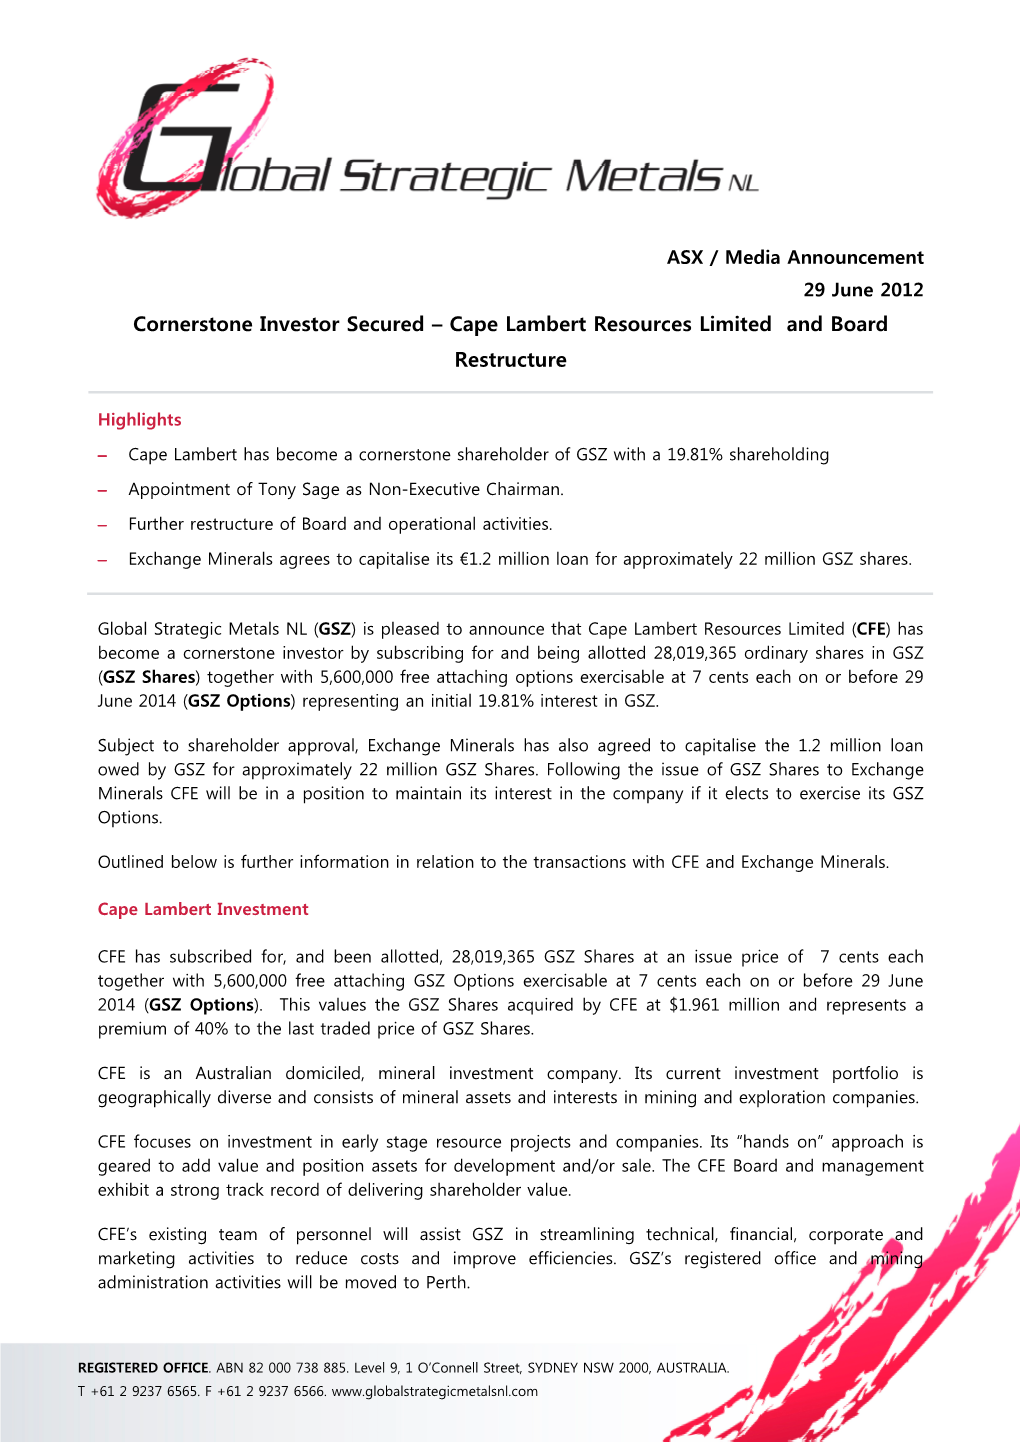 Cape Lambert Resources Limited and Board Restructure